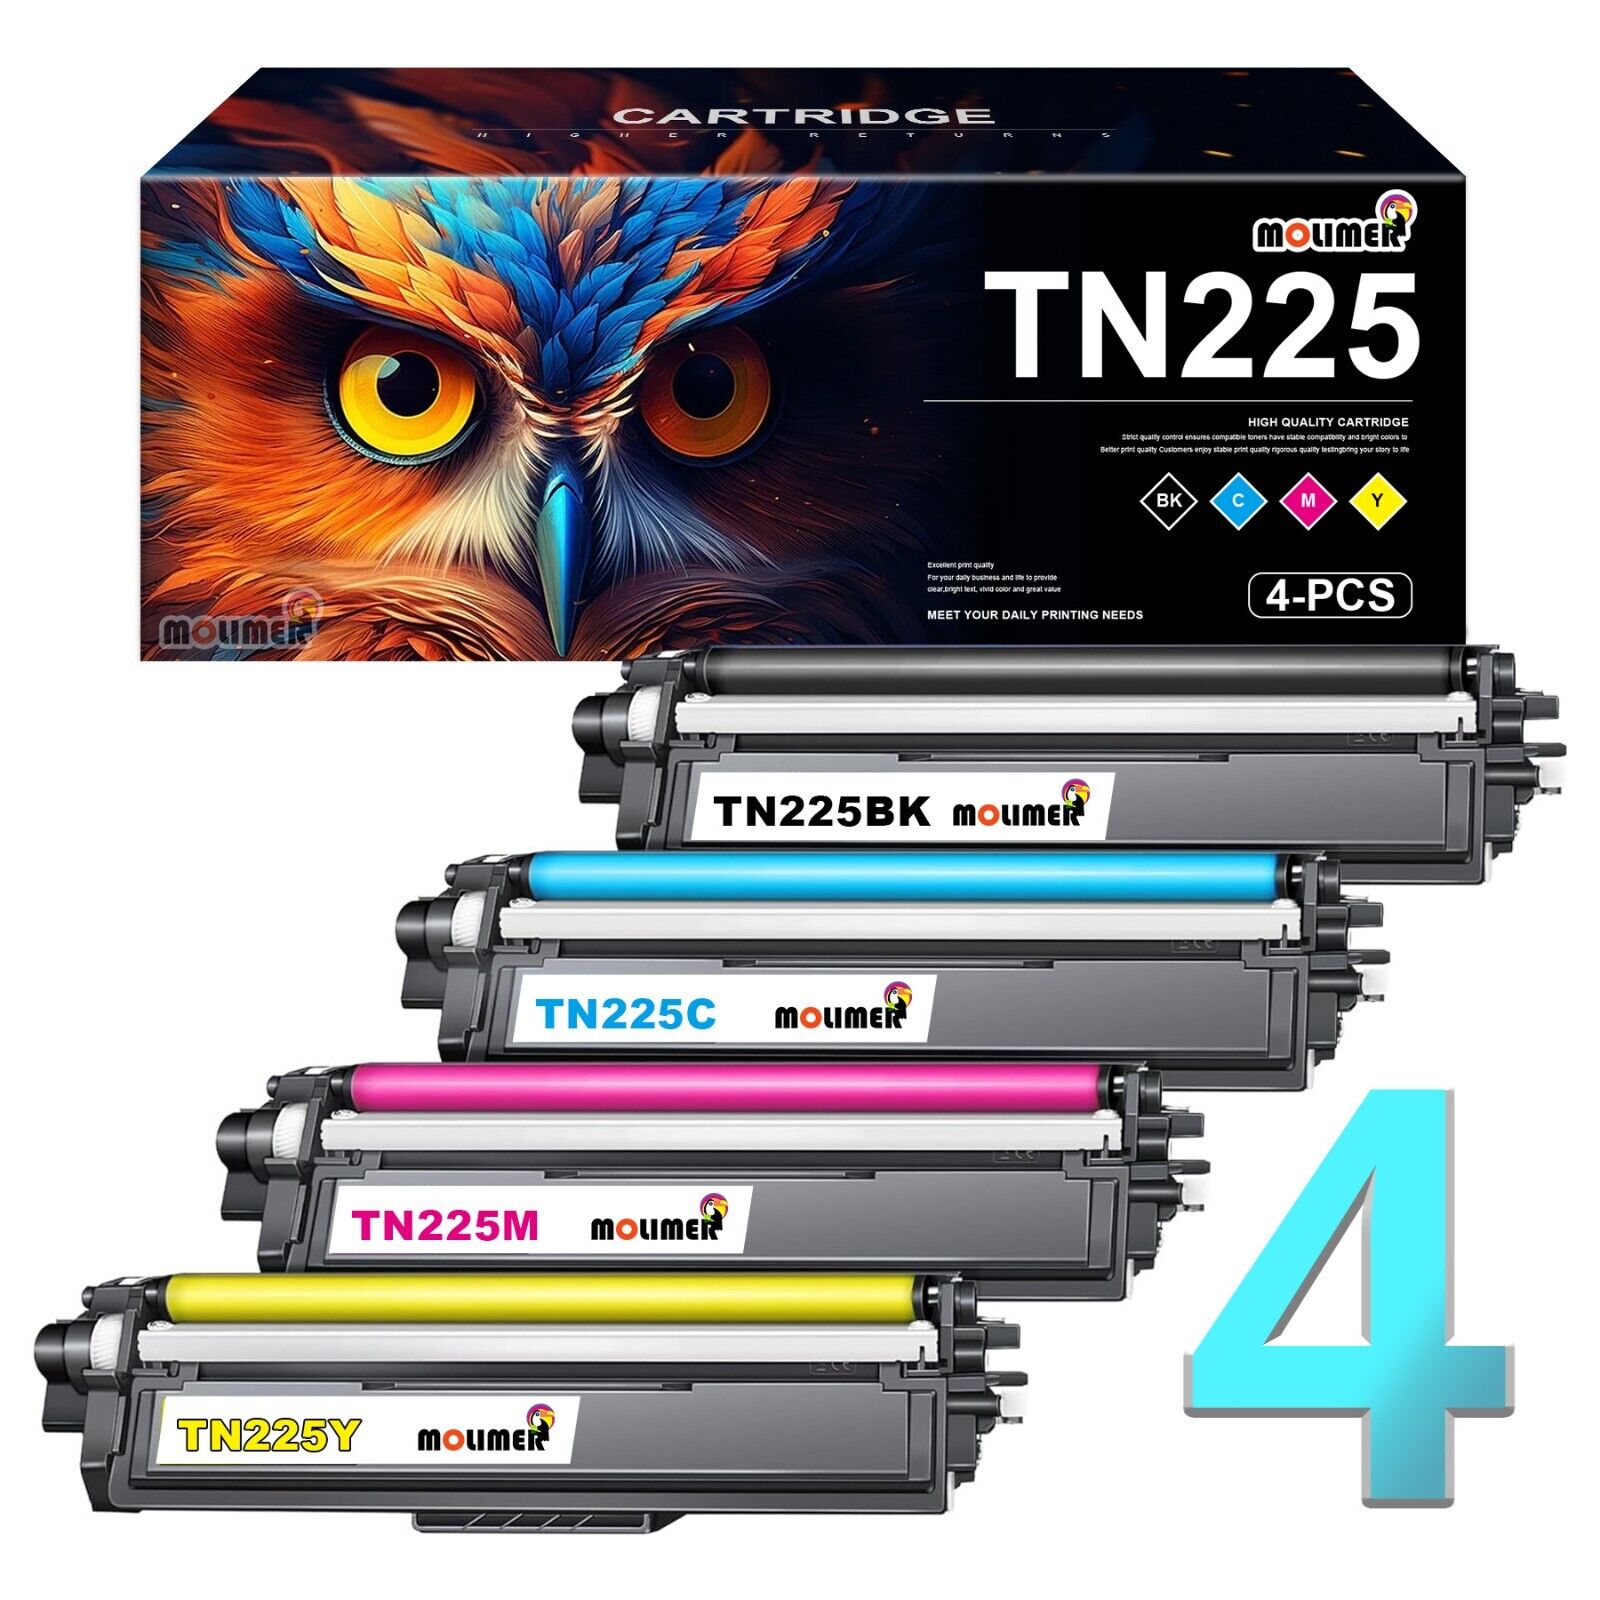 TN225 Toner Cartridge Replacement for Brother HL-3140CW HL-3170CDW 3180CDW 4 PK